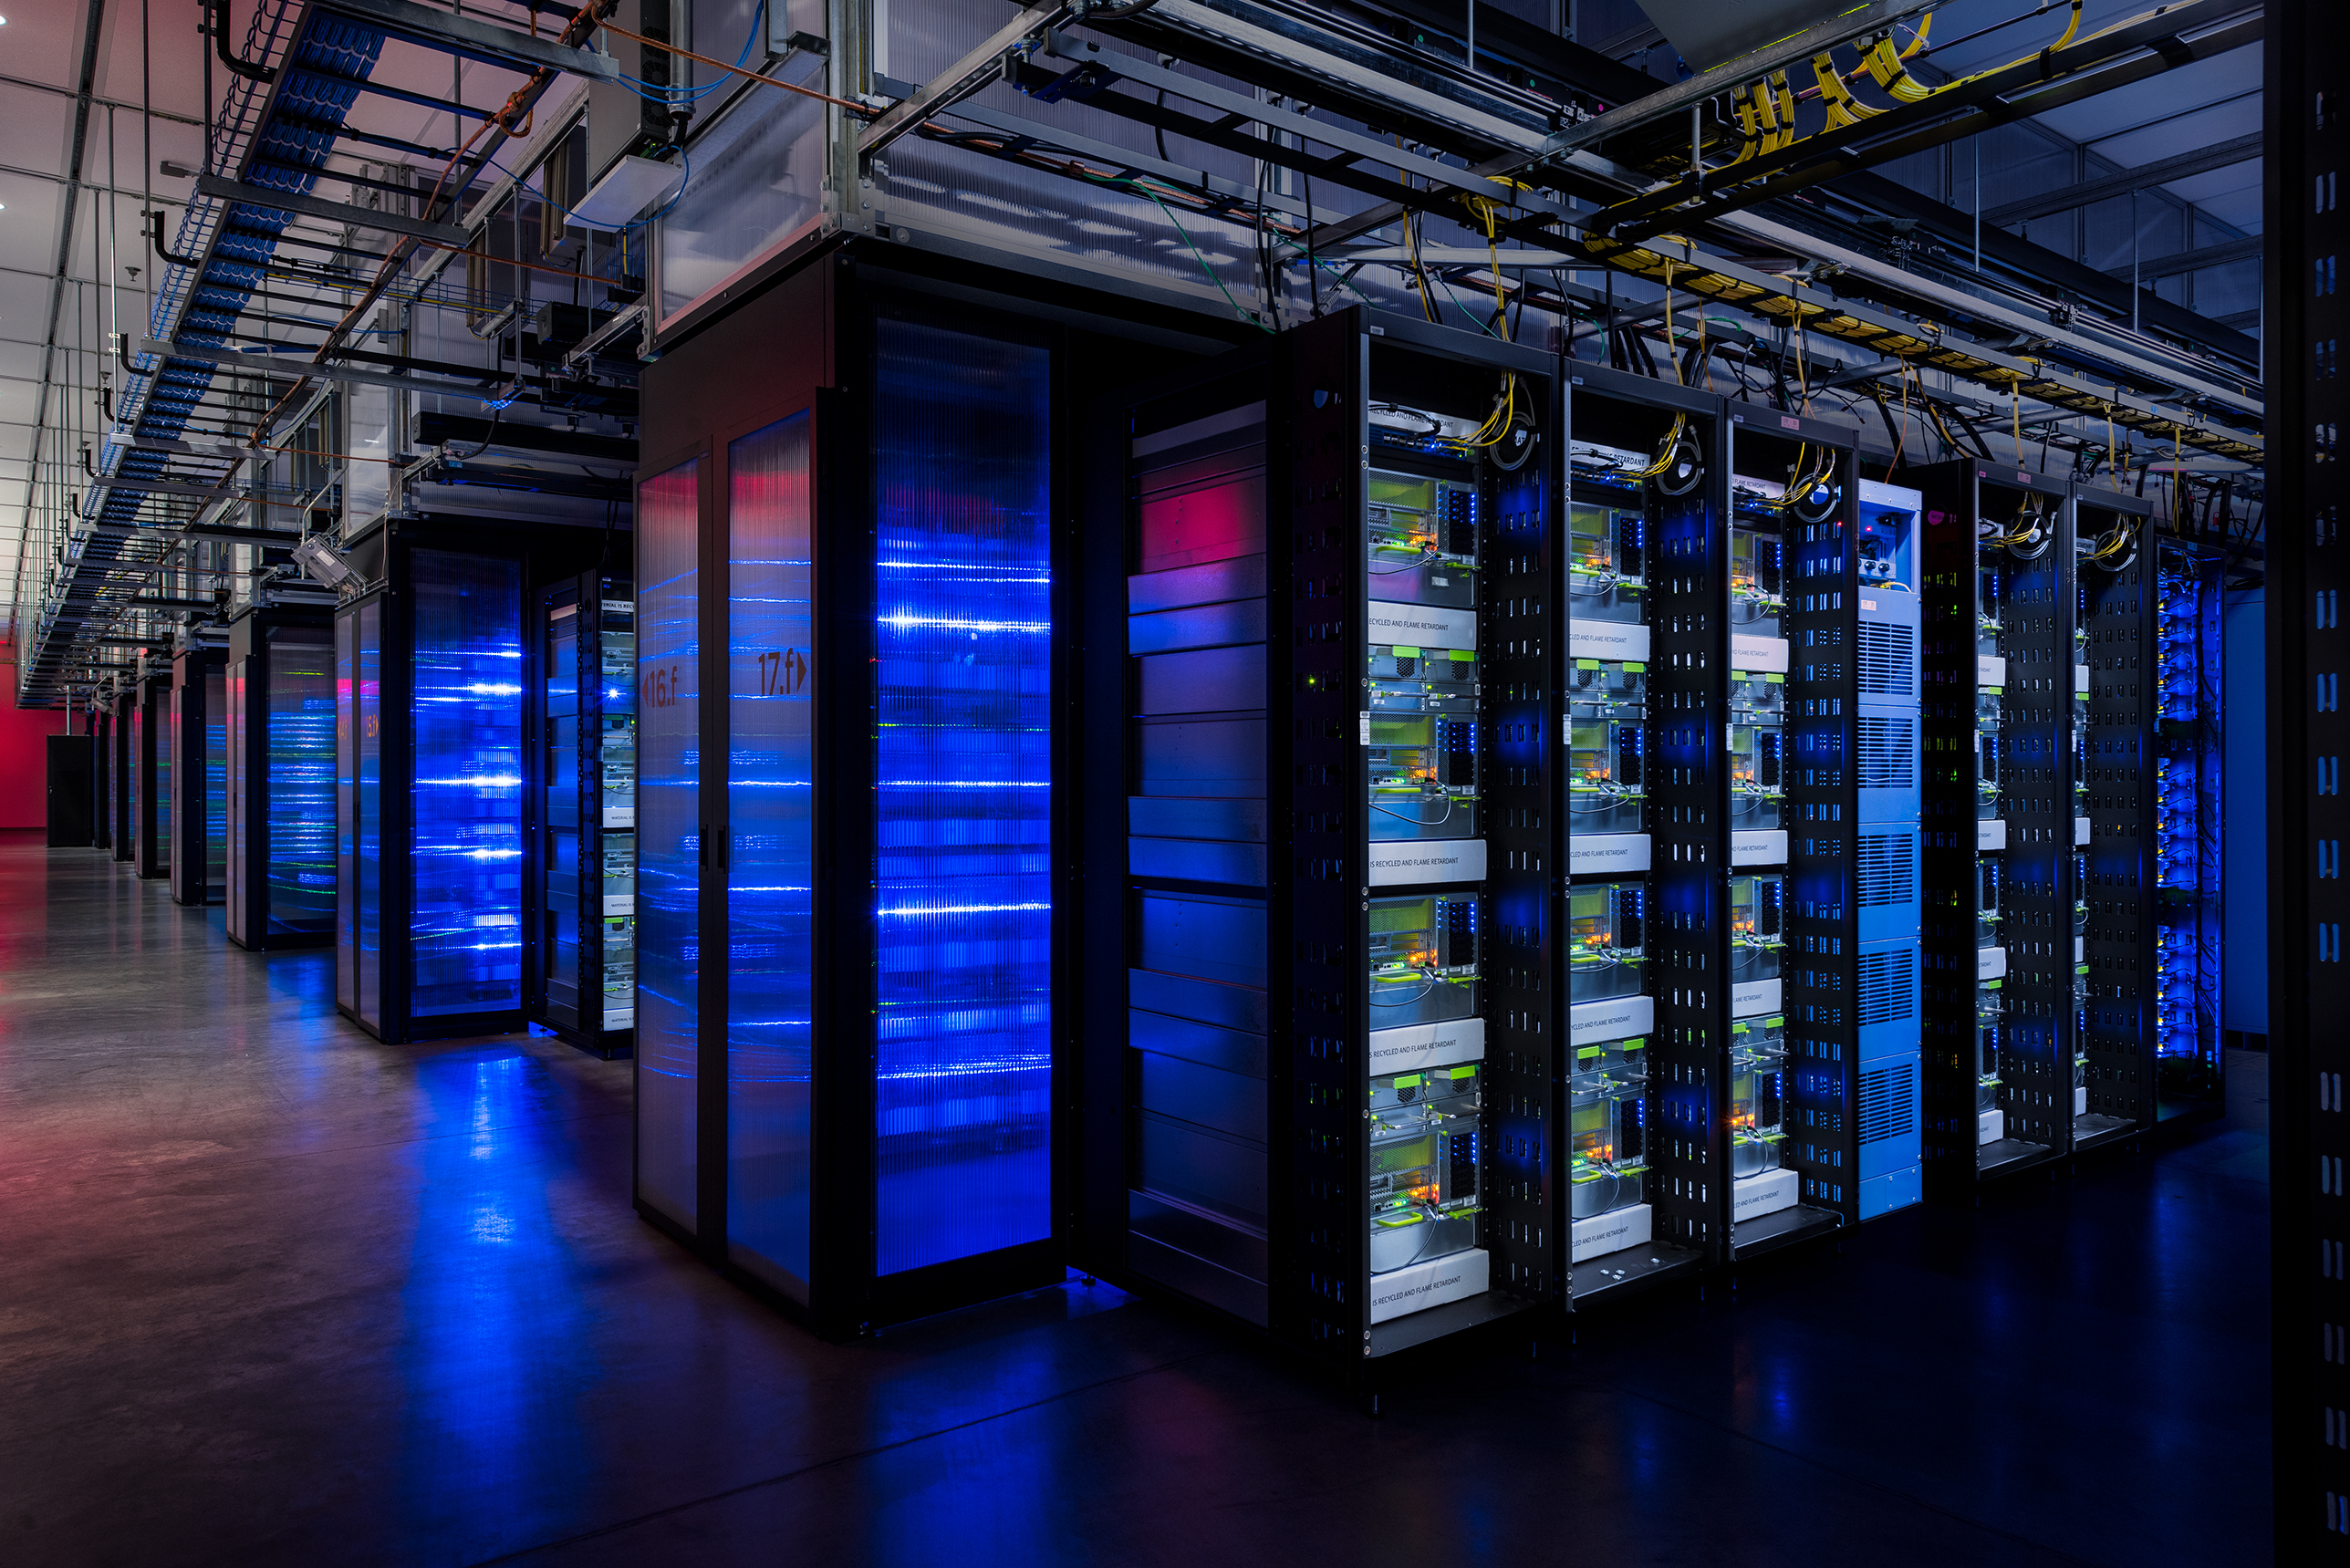 Facebook’s new servers for artificial intelligence research, inside the company’s data center in Prineville, Oregon.